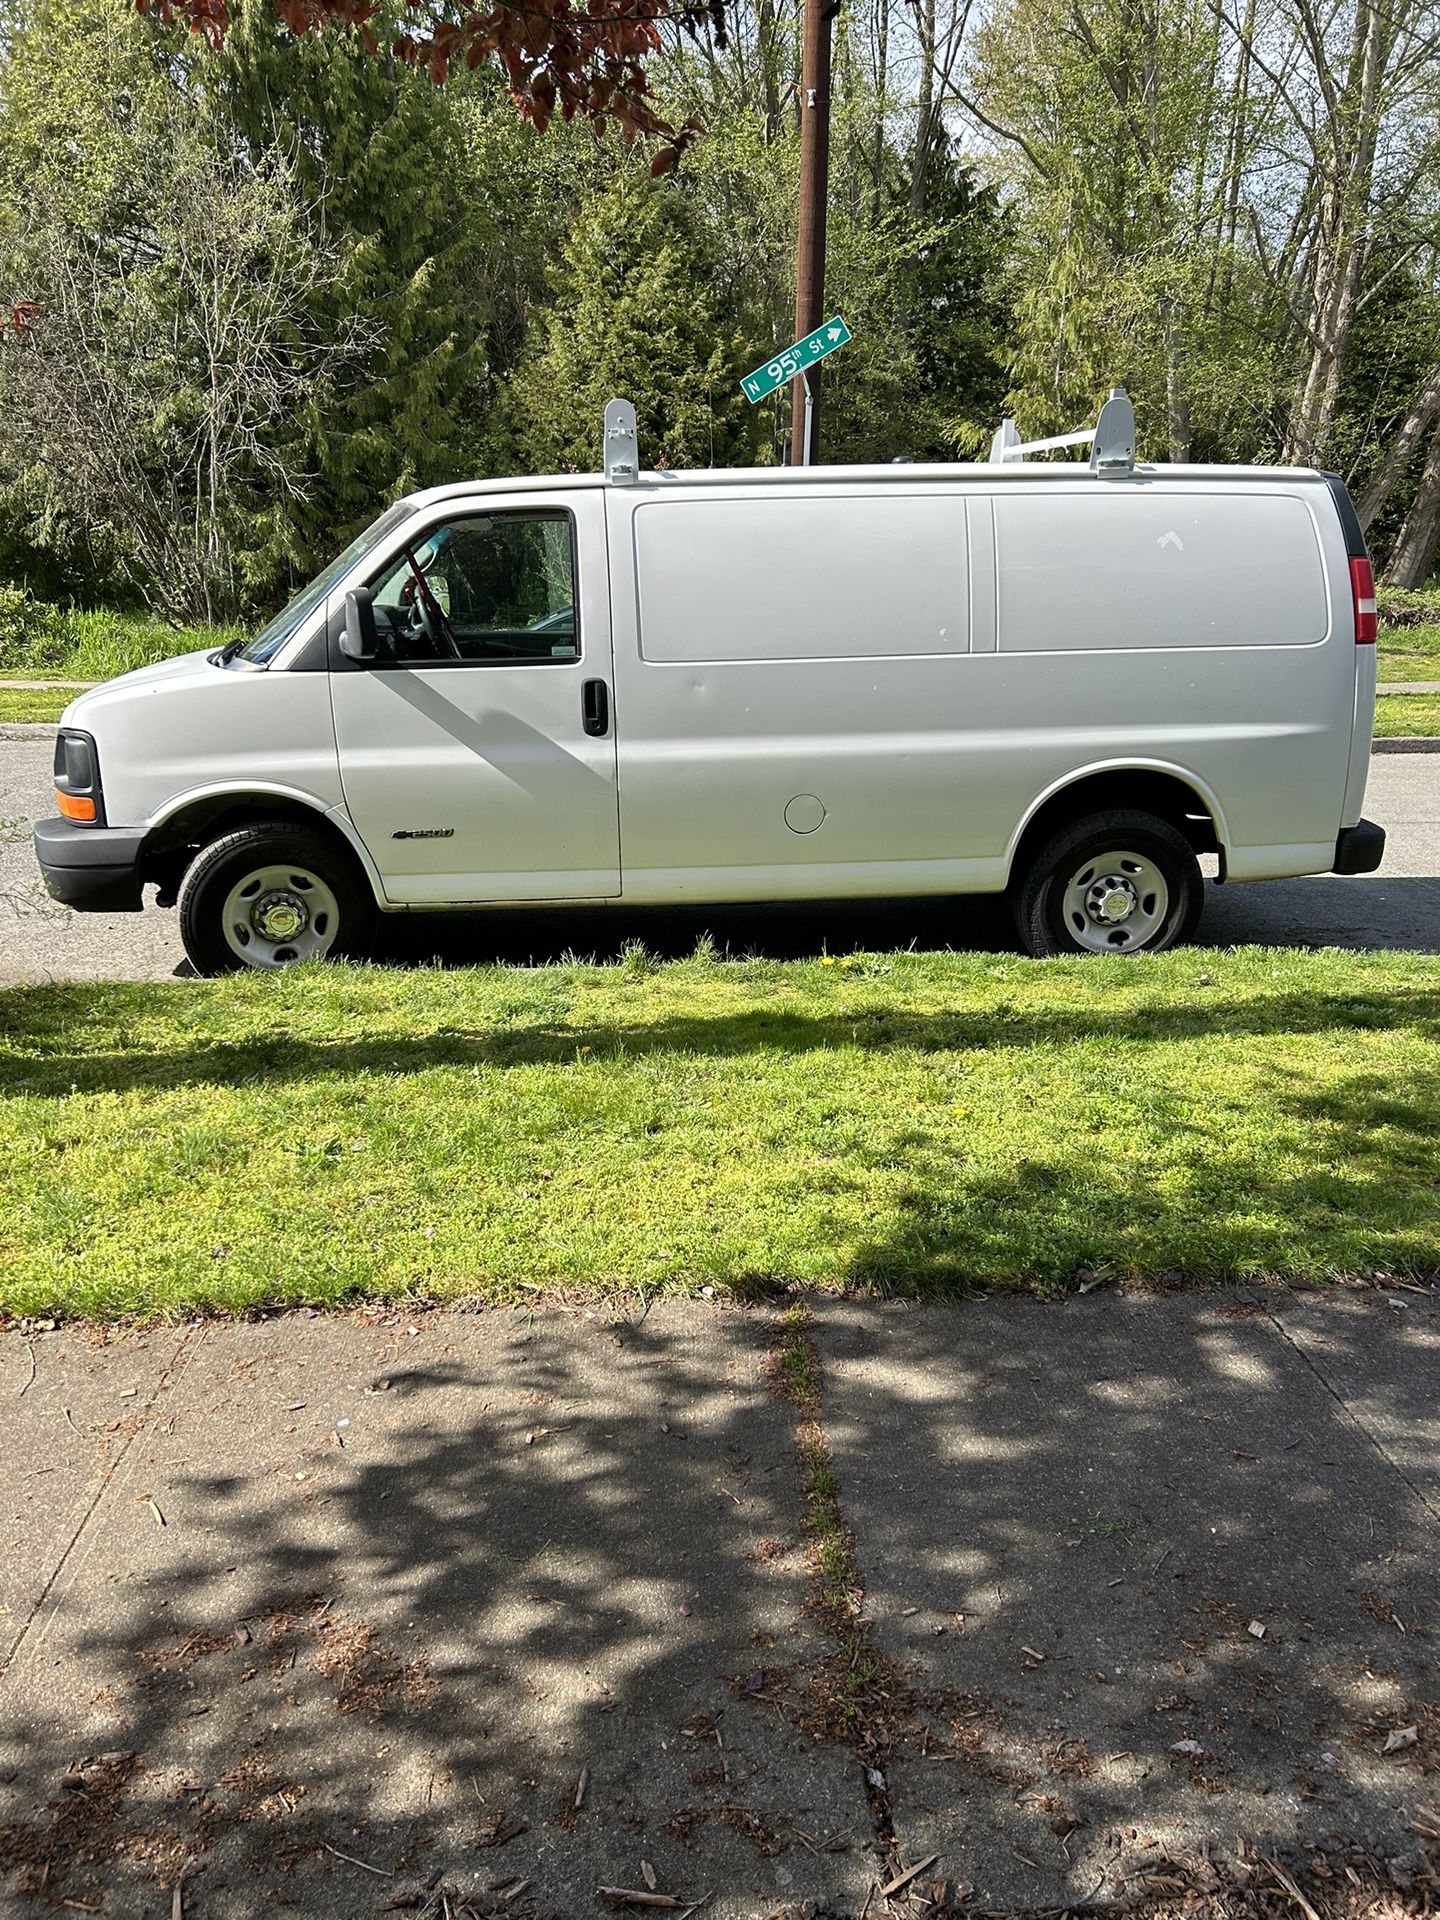 2005 Chevy Express Cargo Van 2500 4.8L A/C Racks Shelves New Tires Excellent Engine Tranny Construction Work Painting Gardening 155K Clean Title Ready